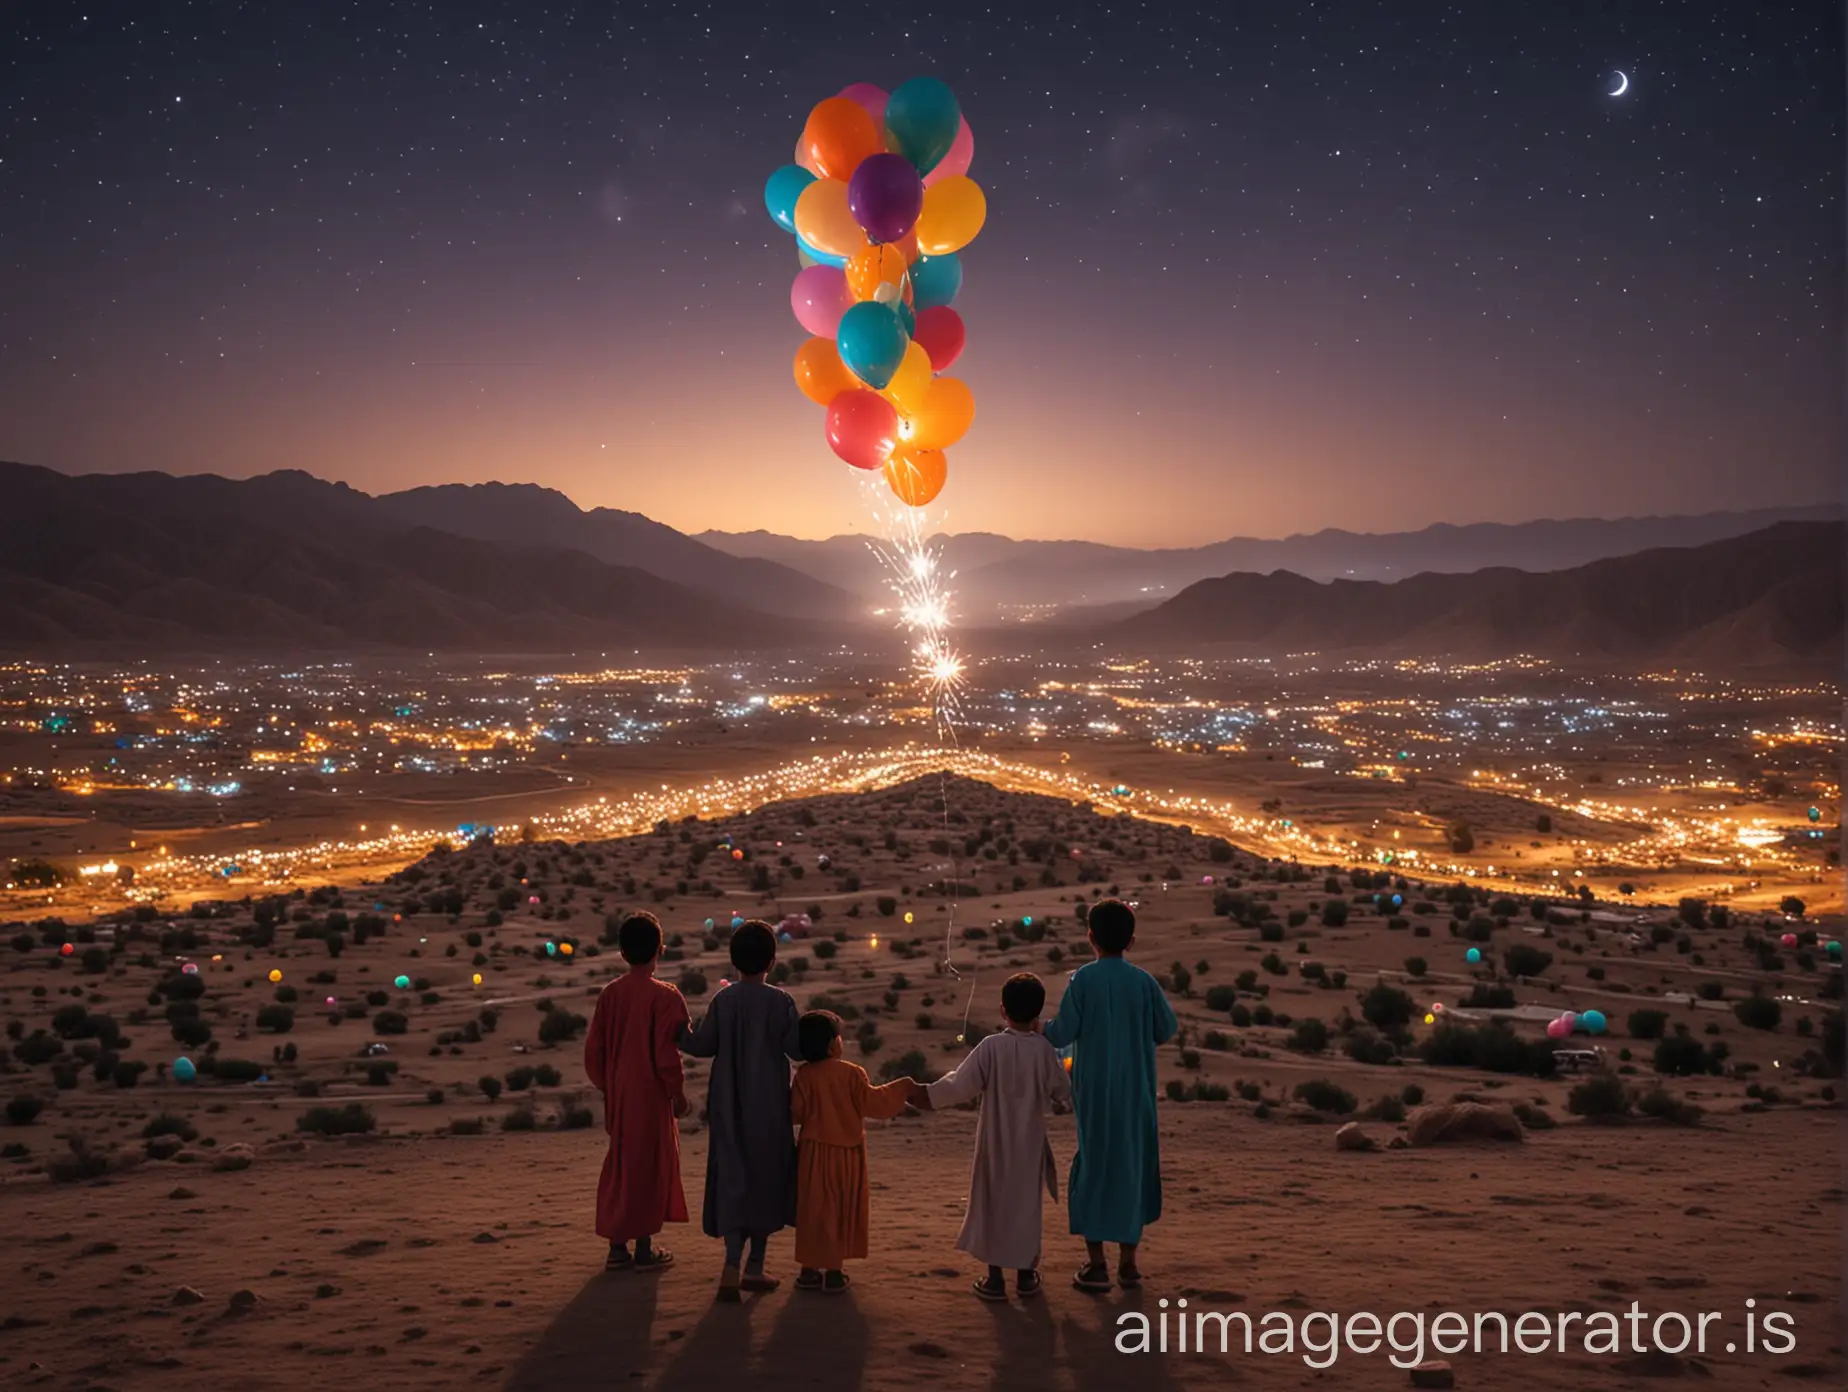 Joyful-Afghan-Children-Celebrating-Eid-ul-Adha-with-Balloons-and-Candy-at-Night